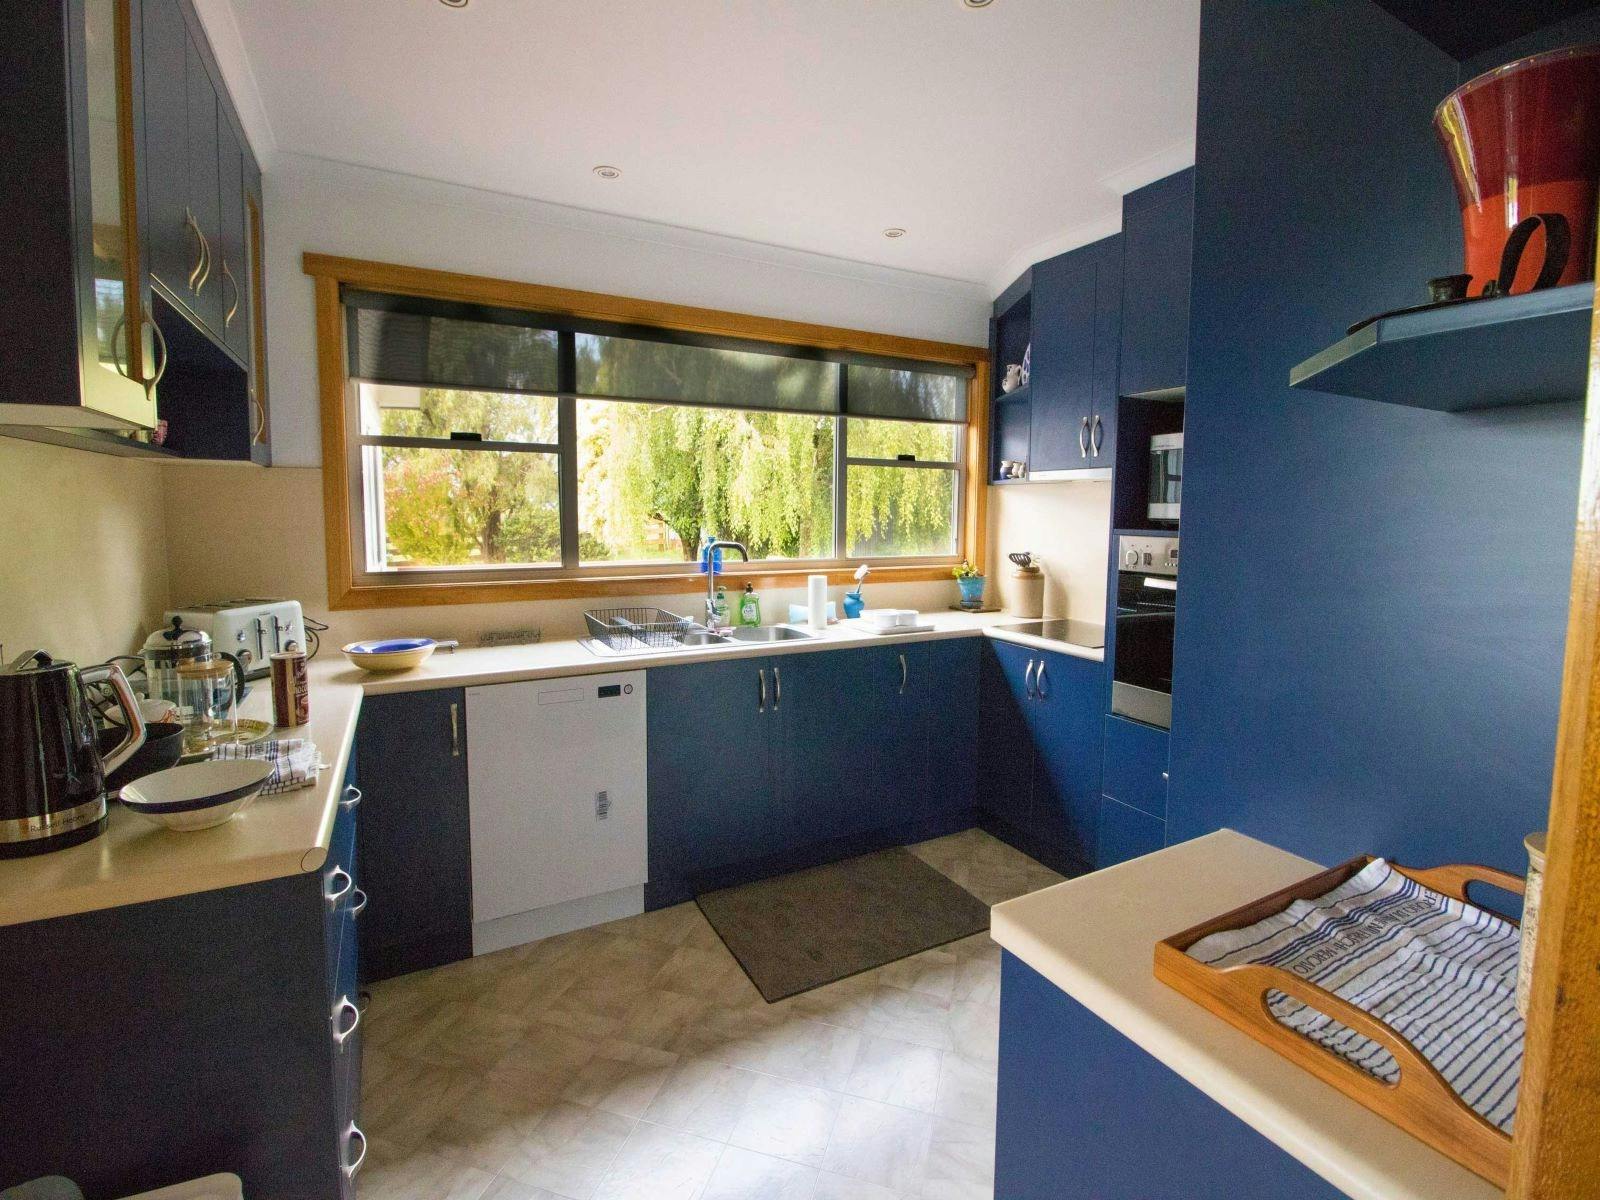 Spacious blue kitchen with oven and kettle